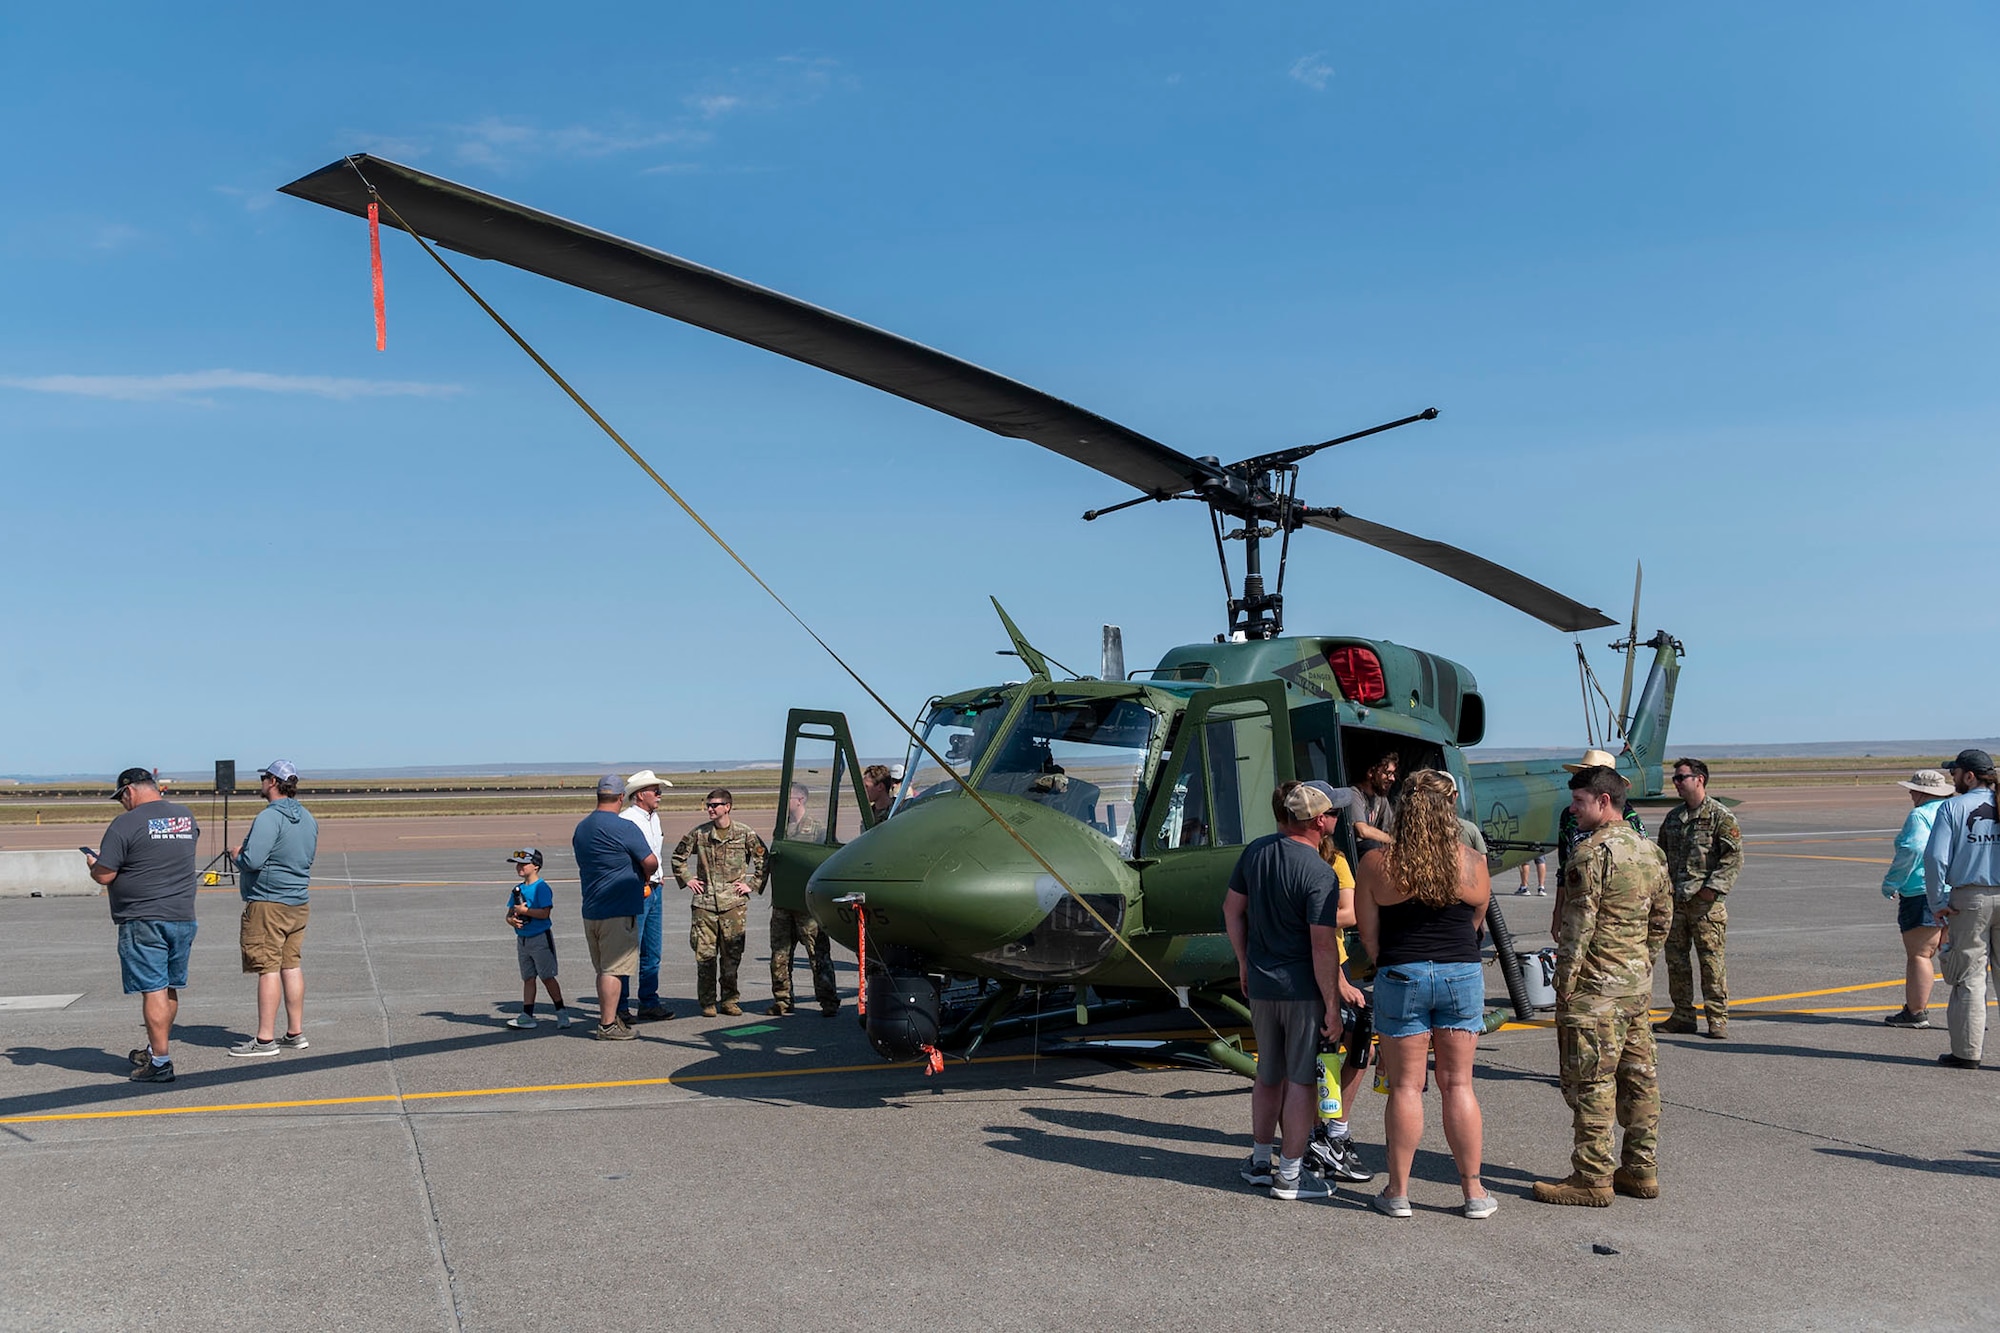 Members of the local community view a Bell UH-1N Twin "Huey" from the 40th Helicopter Squadron's static display during the Montana's Military Open House "Flight over the Falls" at Montana Air National Guard Base, Great Falls, Montana, July 24, 2022.